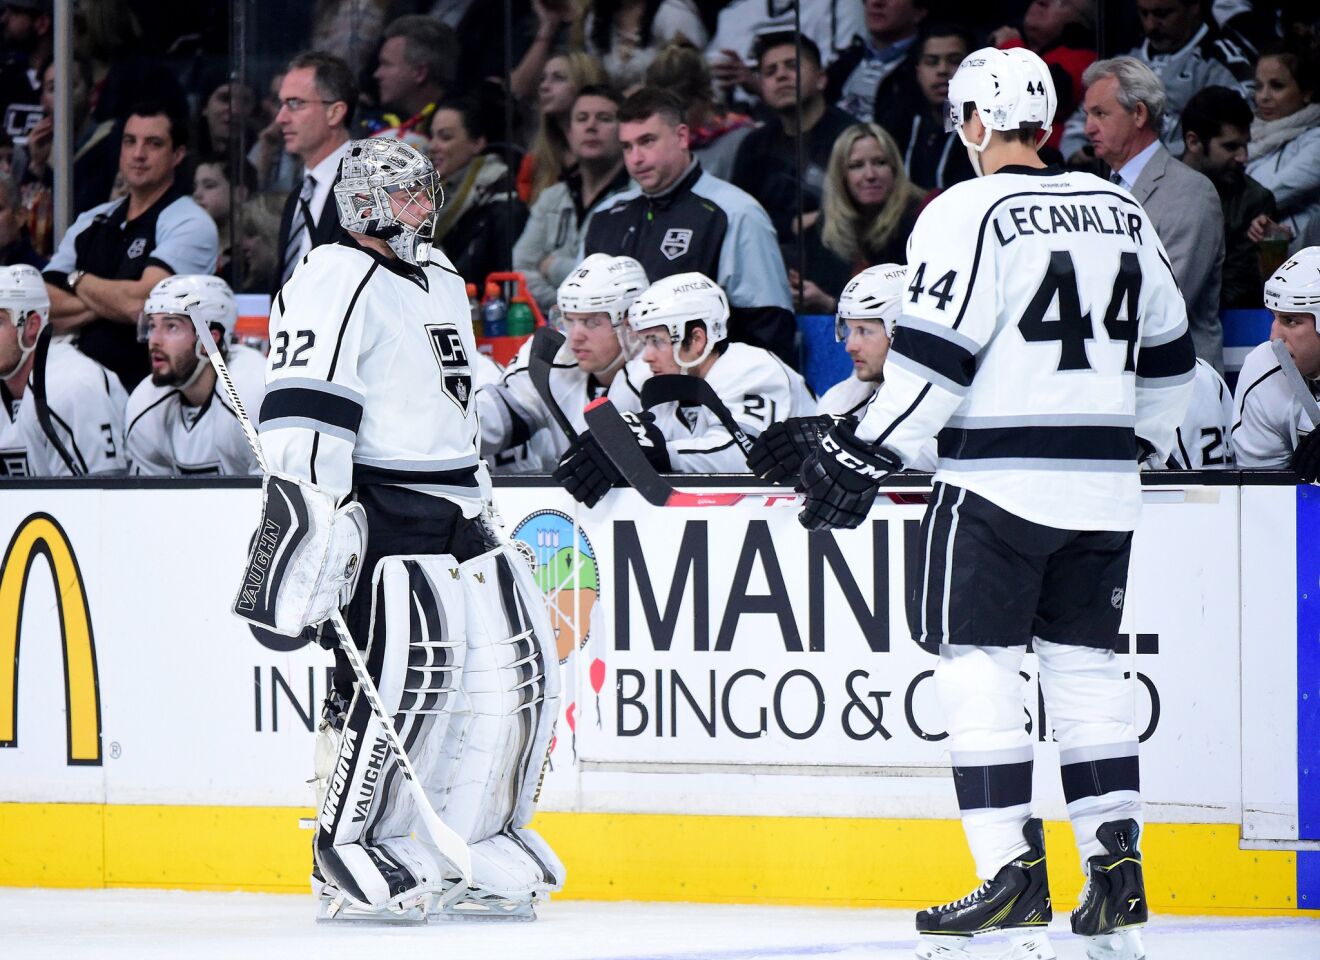 Kings goalie Jonathan Quick exits the game against the Ducks in the second period when trailing 3-0.